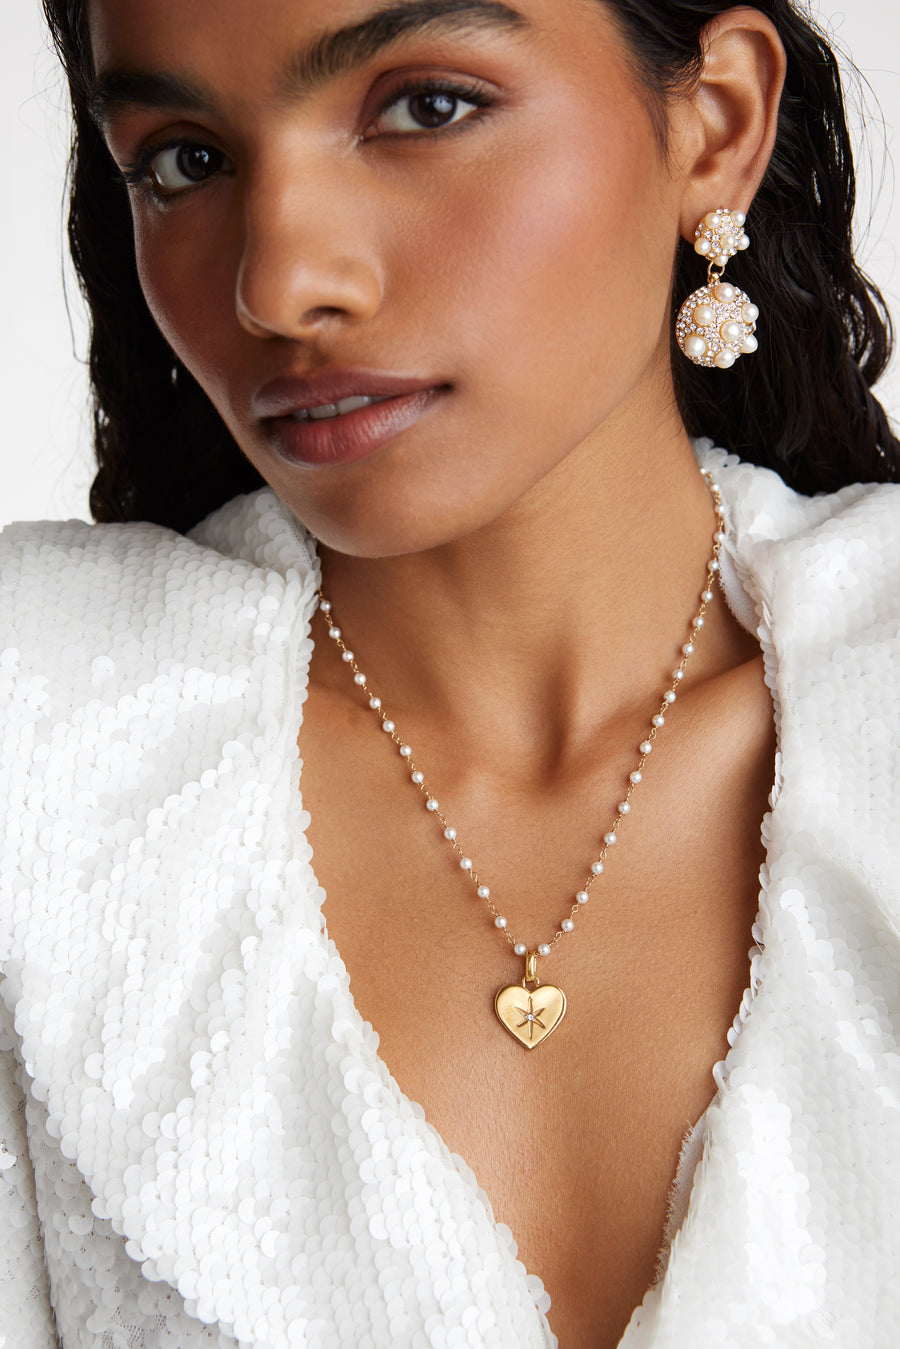 Model shot wearing the Soru Jewellery clear crystal surrounded by a star etching set in a shiny gold heart attached to a white beaded necklace. Model also wearing the pearl cluster earrings